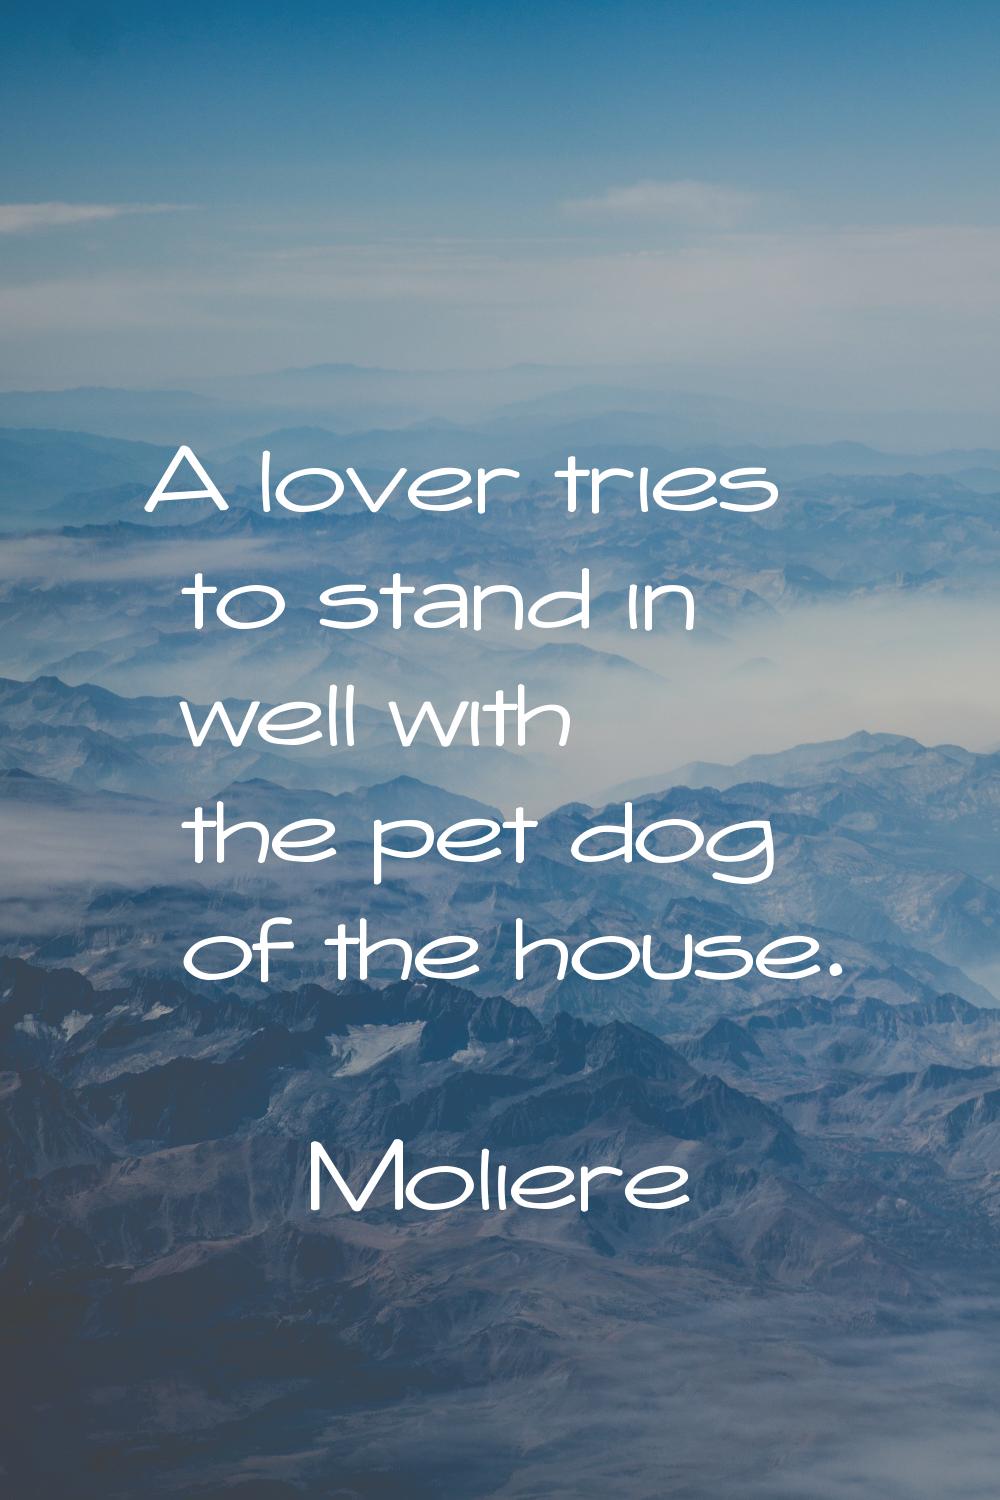 A lover tries to stand in well with the pet dog of the house.